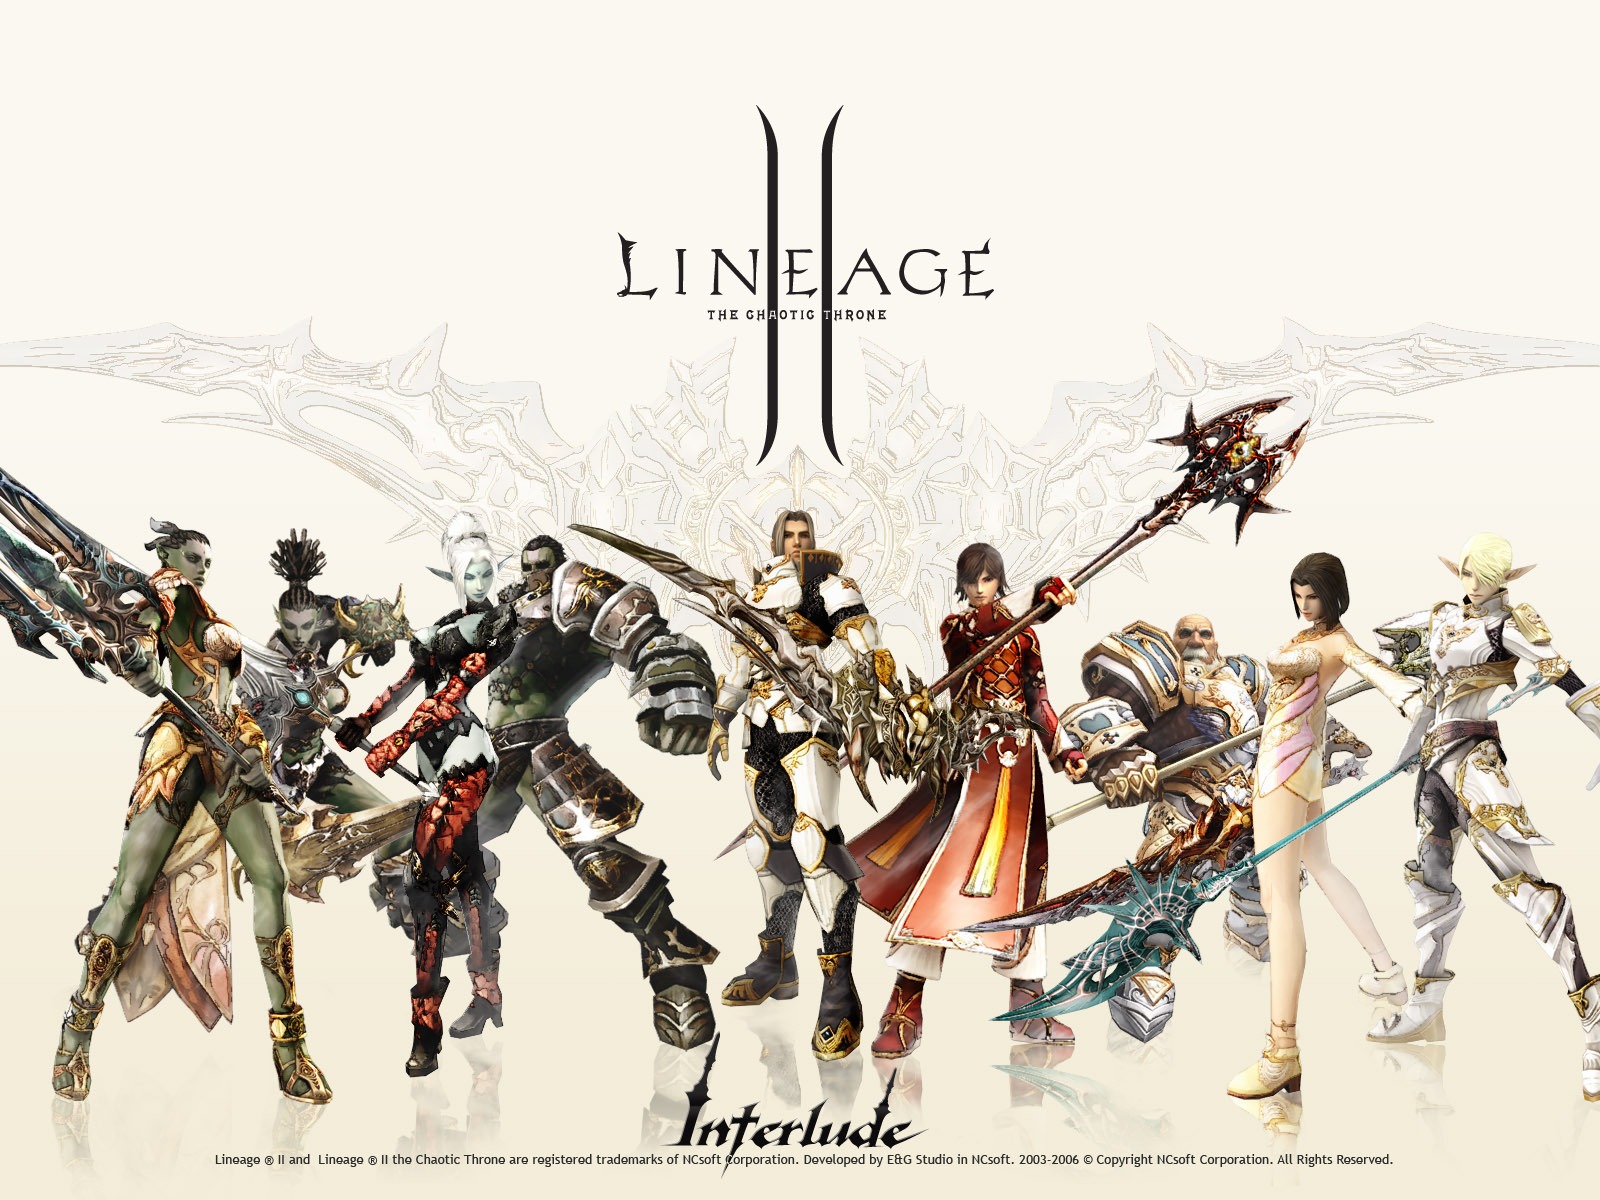 LINEAGE Ⅱ modeling HD gaming wallpapers #8 - 1600x1200